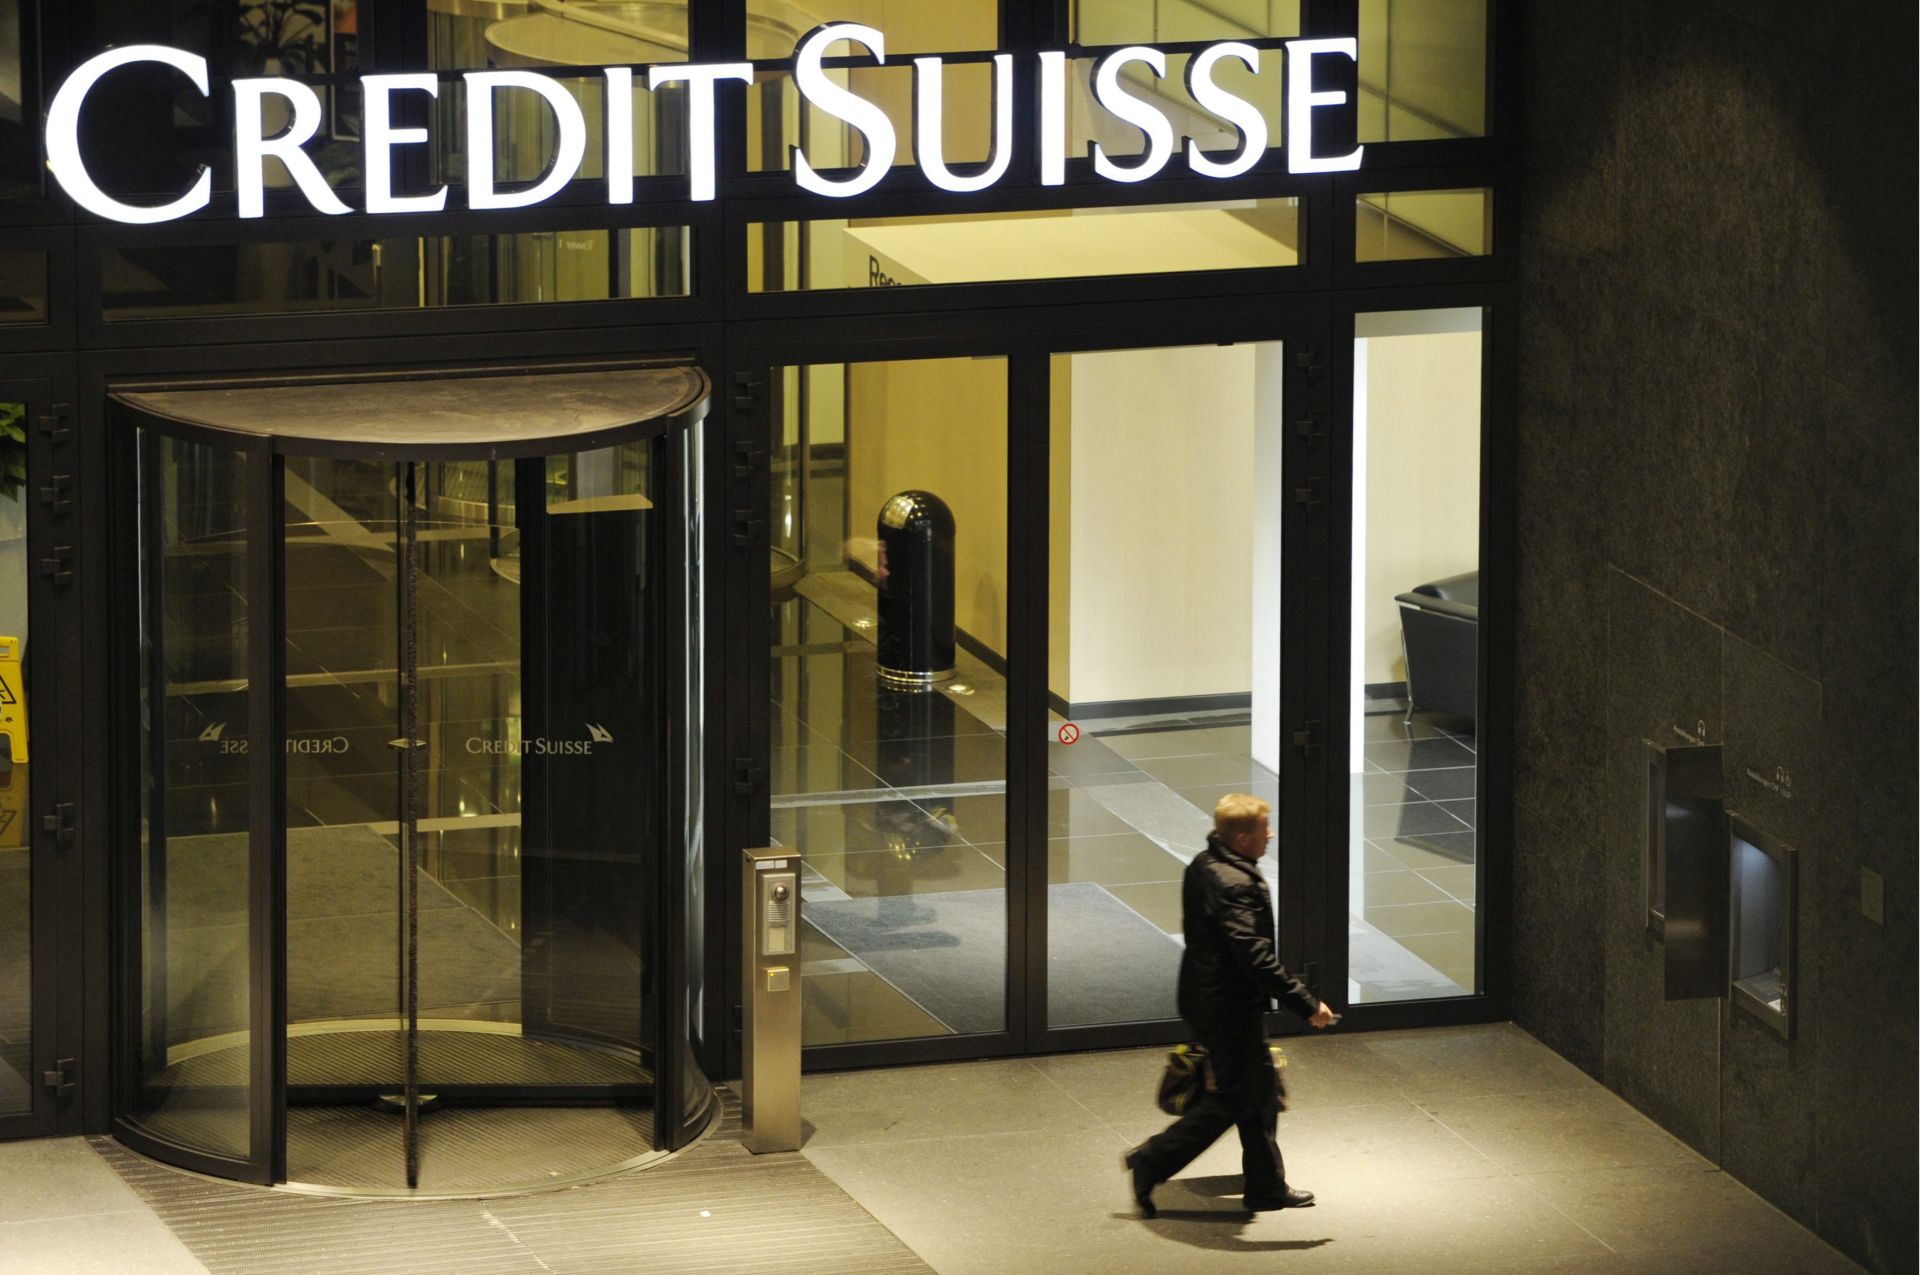 epa05226675 (FILE) A file photograph showing the logo at the entrance of the Swiss bank Credit Suisse in Zurich, Switzerland, 17 November 2011. Reports on 23 March 2016 state that Credit Suisse Group is stepping up cost cuts including eliminating 2,000 jobs at its Global Markets business to better weather challenging market conditions.  EPA/STEFFEN SCHMIDT